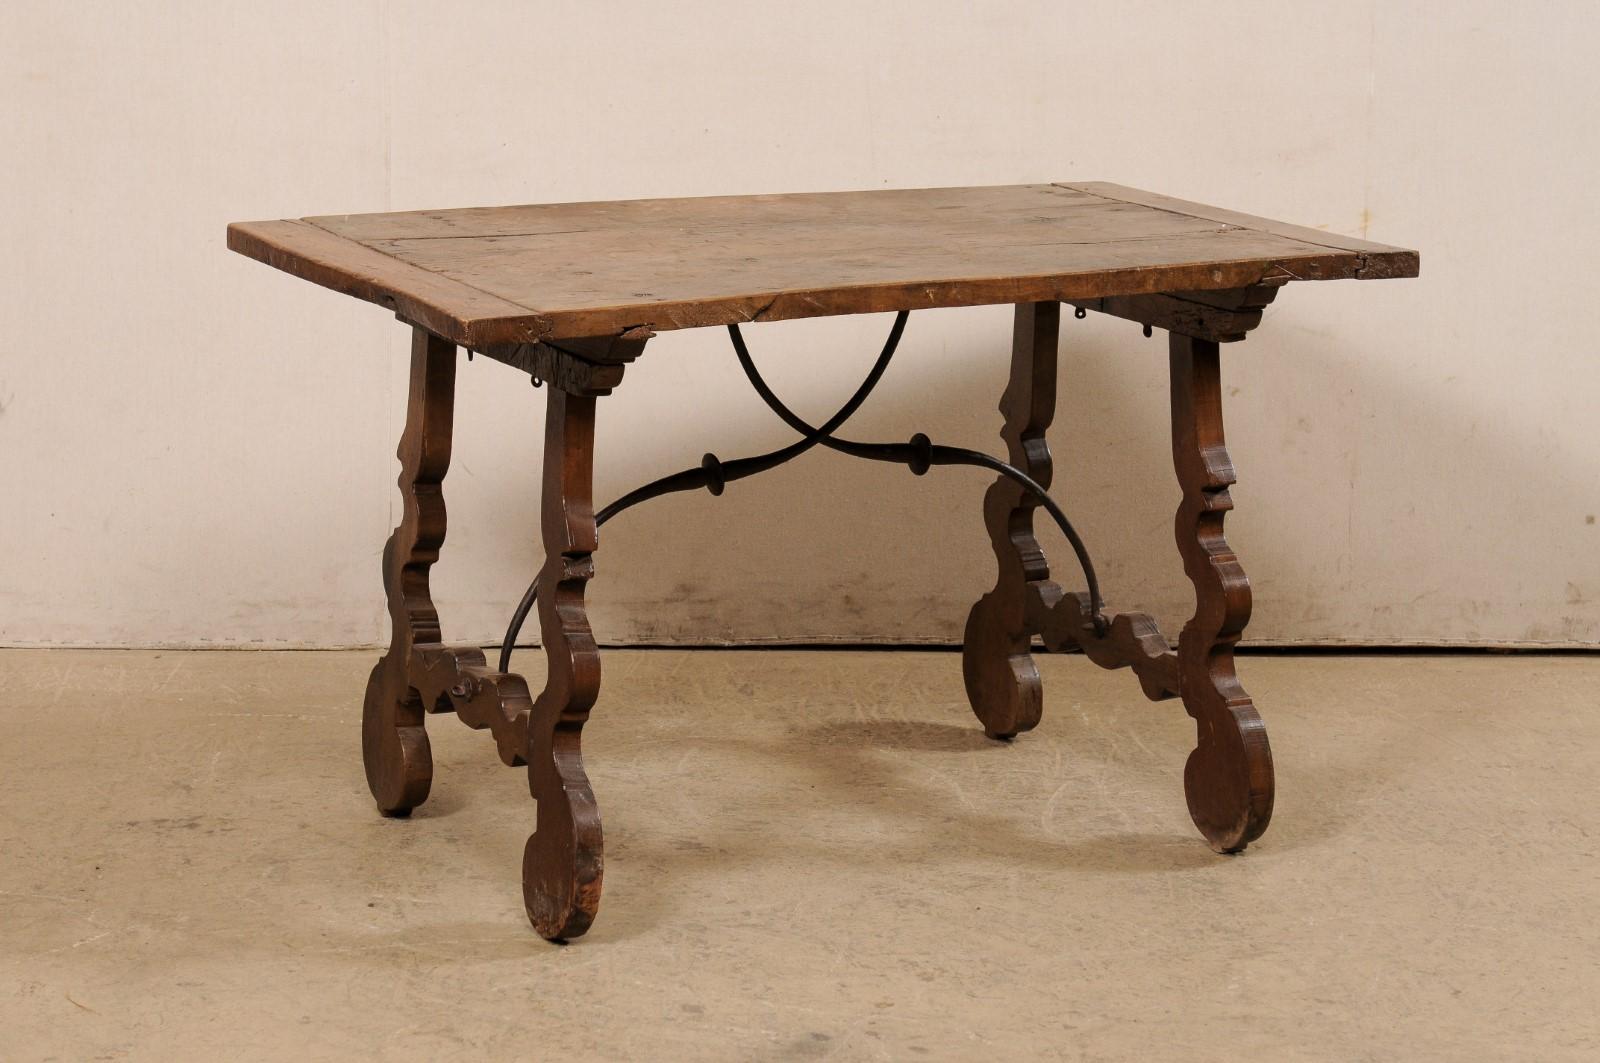 An Italian fratino walnut table with lyre legs and iron stretcher from the early 19th century. This antique table from Italy, in typical fratino style, features a walnut wood top, rectangular in shape, and raised upon a pair of lyre design inspired